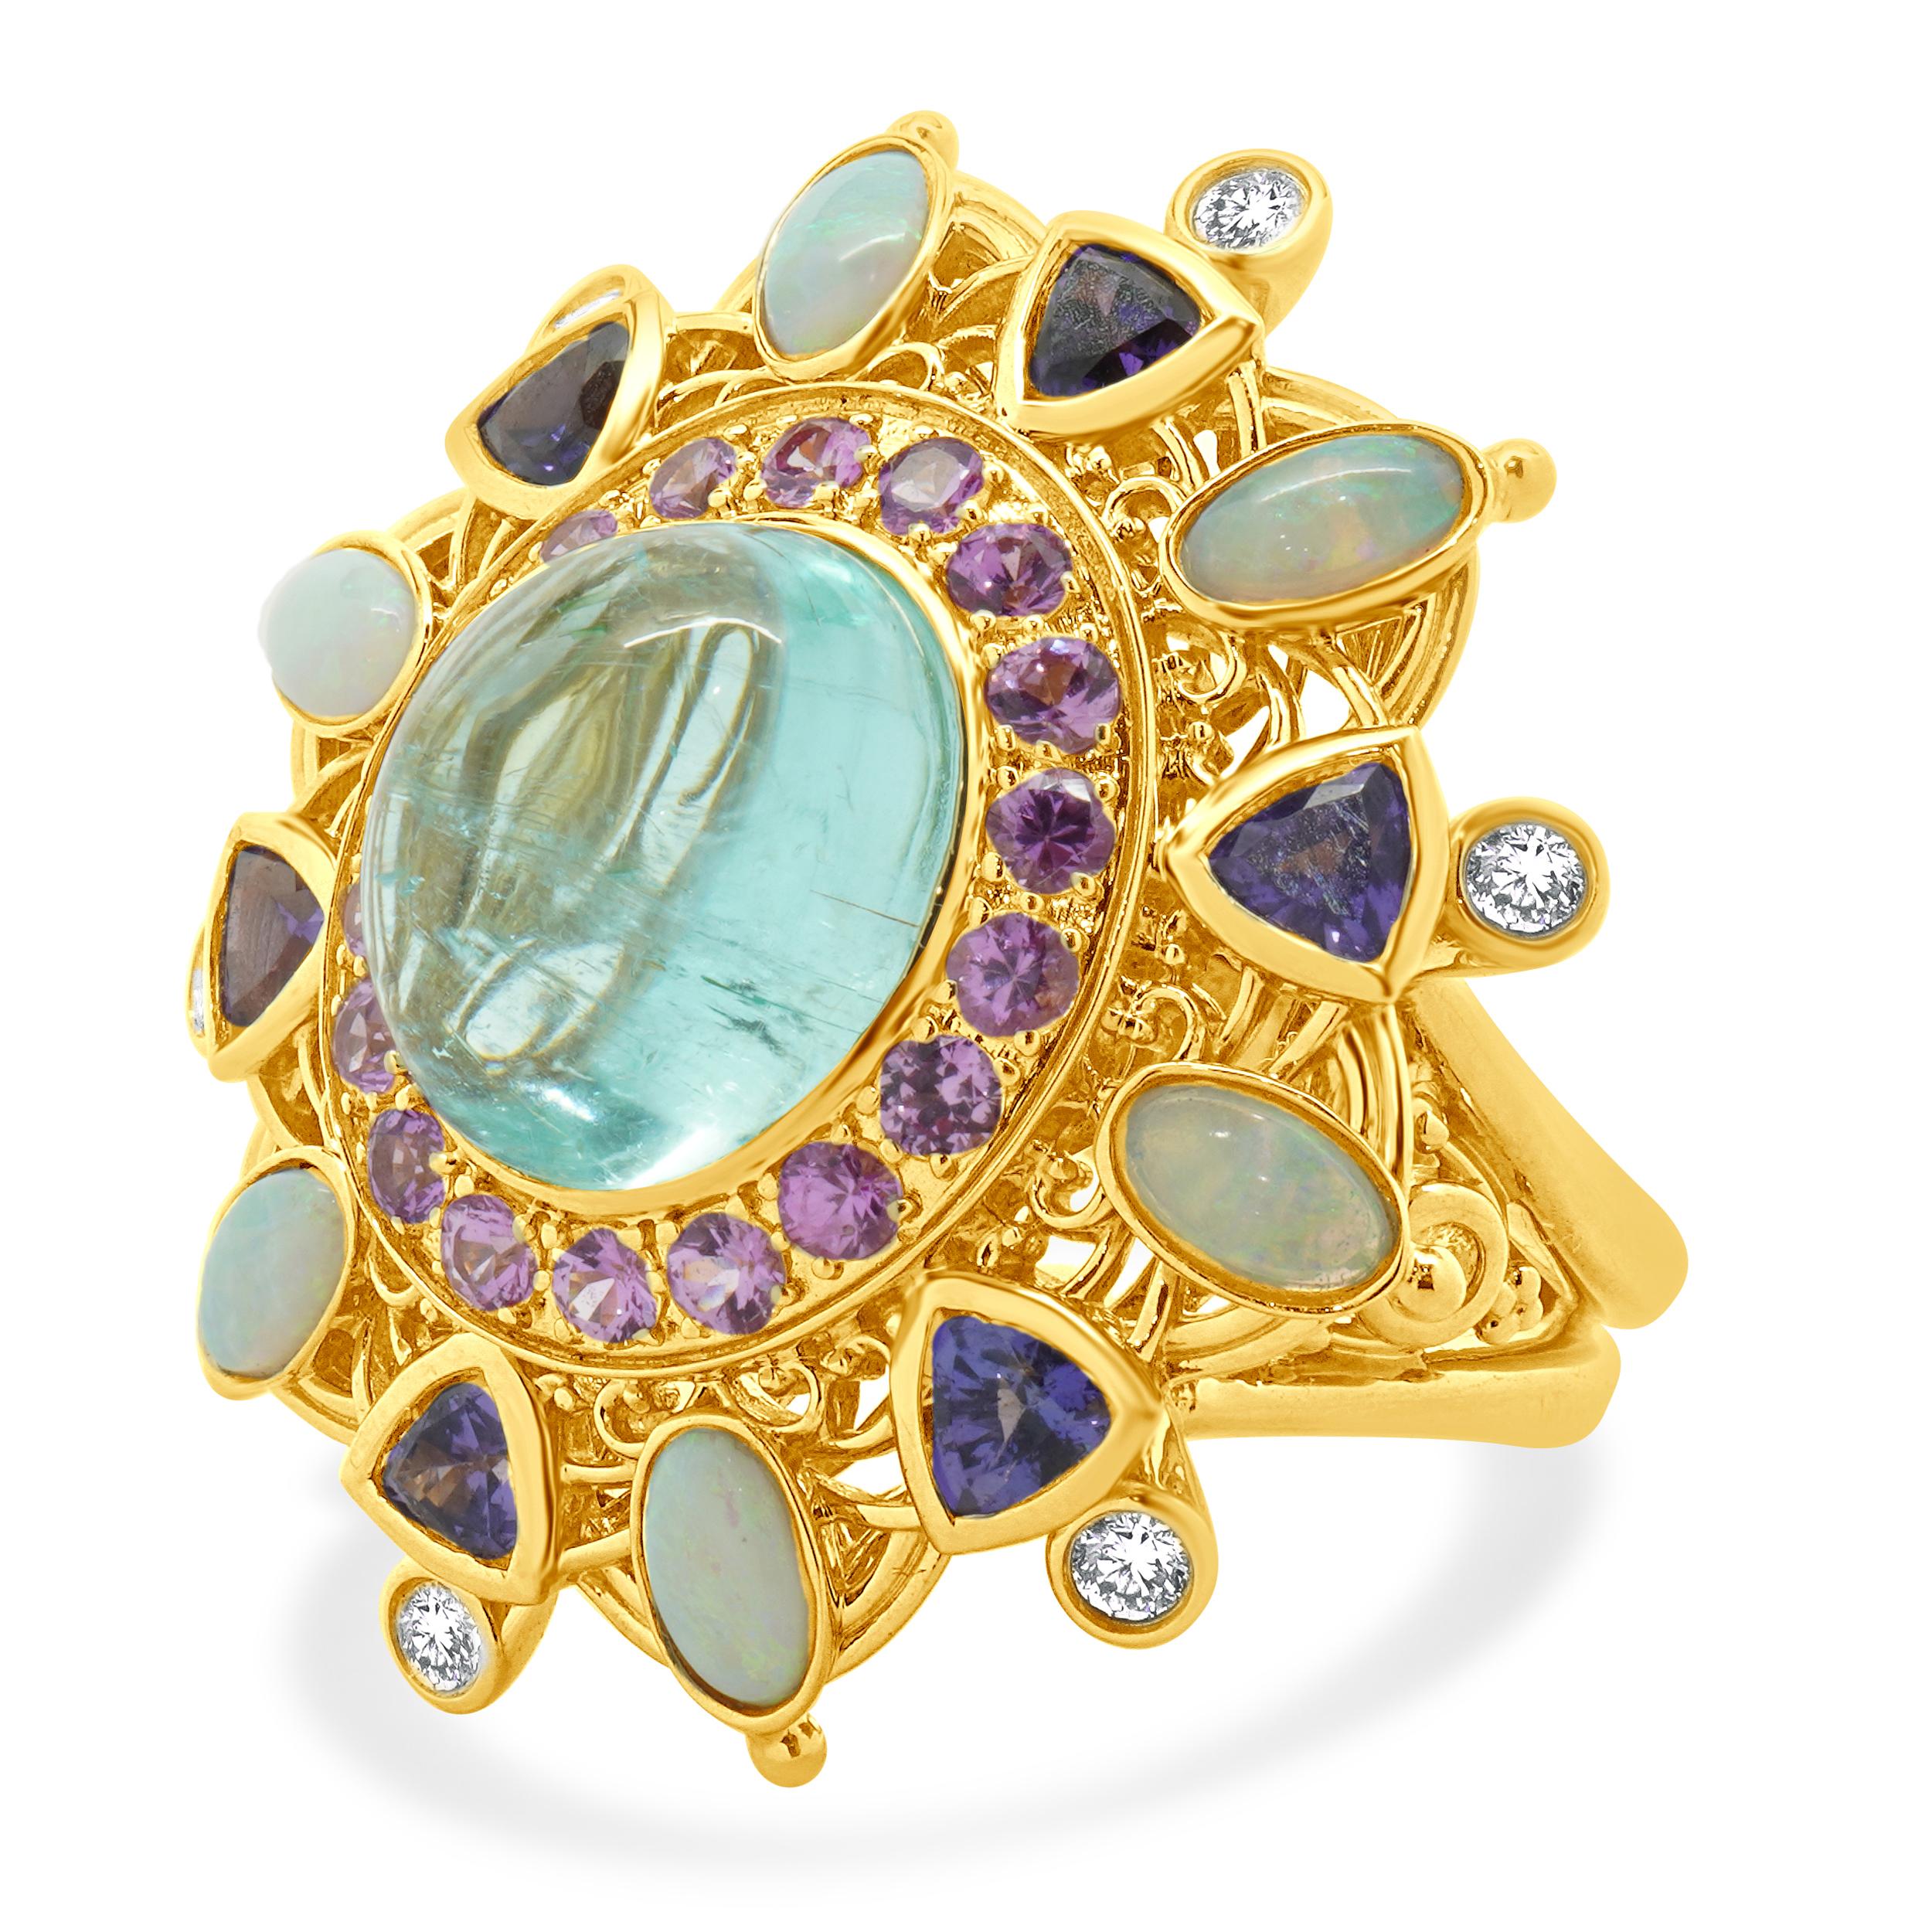 Designer: custom
Material: 18K yellow gold
Diamond: 6 round brilliant cut = 0.25cttw
Color: G
Clarity: SI1
Paraiba Tourmaline: 1 cabochon cut = 7.07ct
Ring Size: 7.5 (please allow two extra shipping days for sizing requests) 
Weight: 17.12 grams